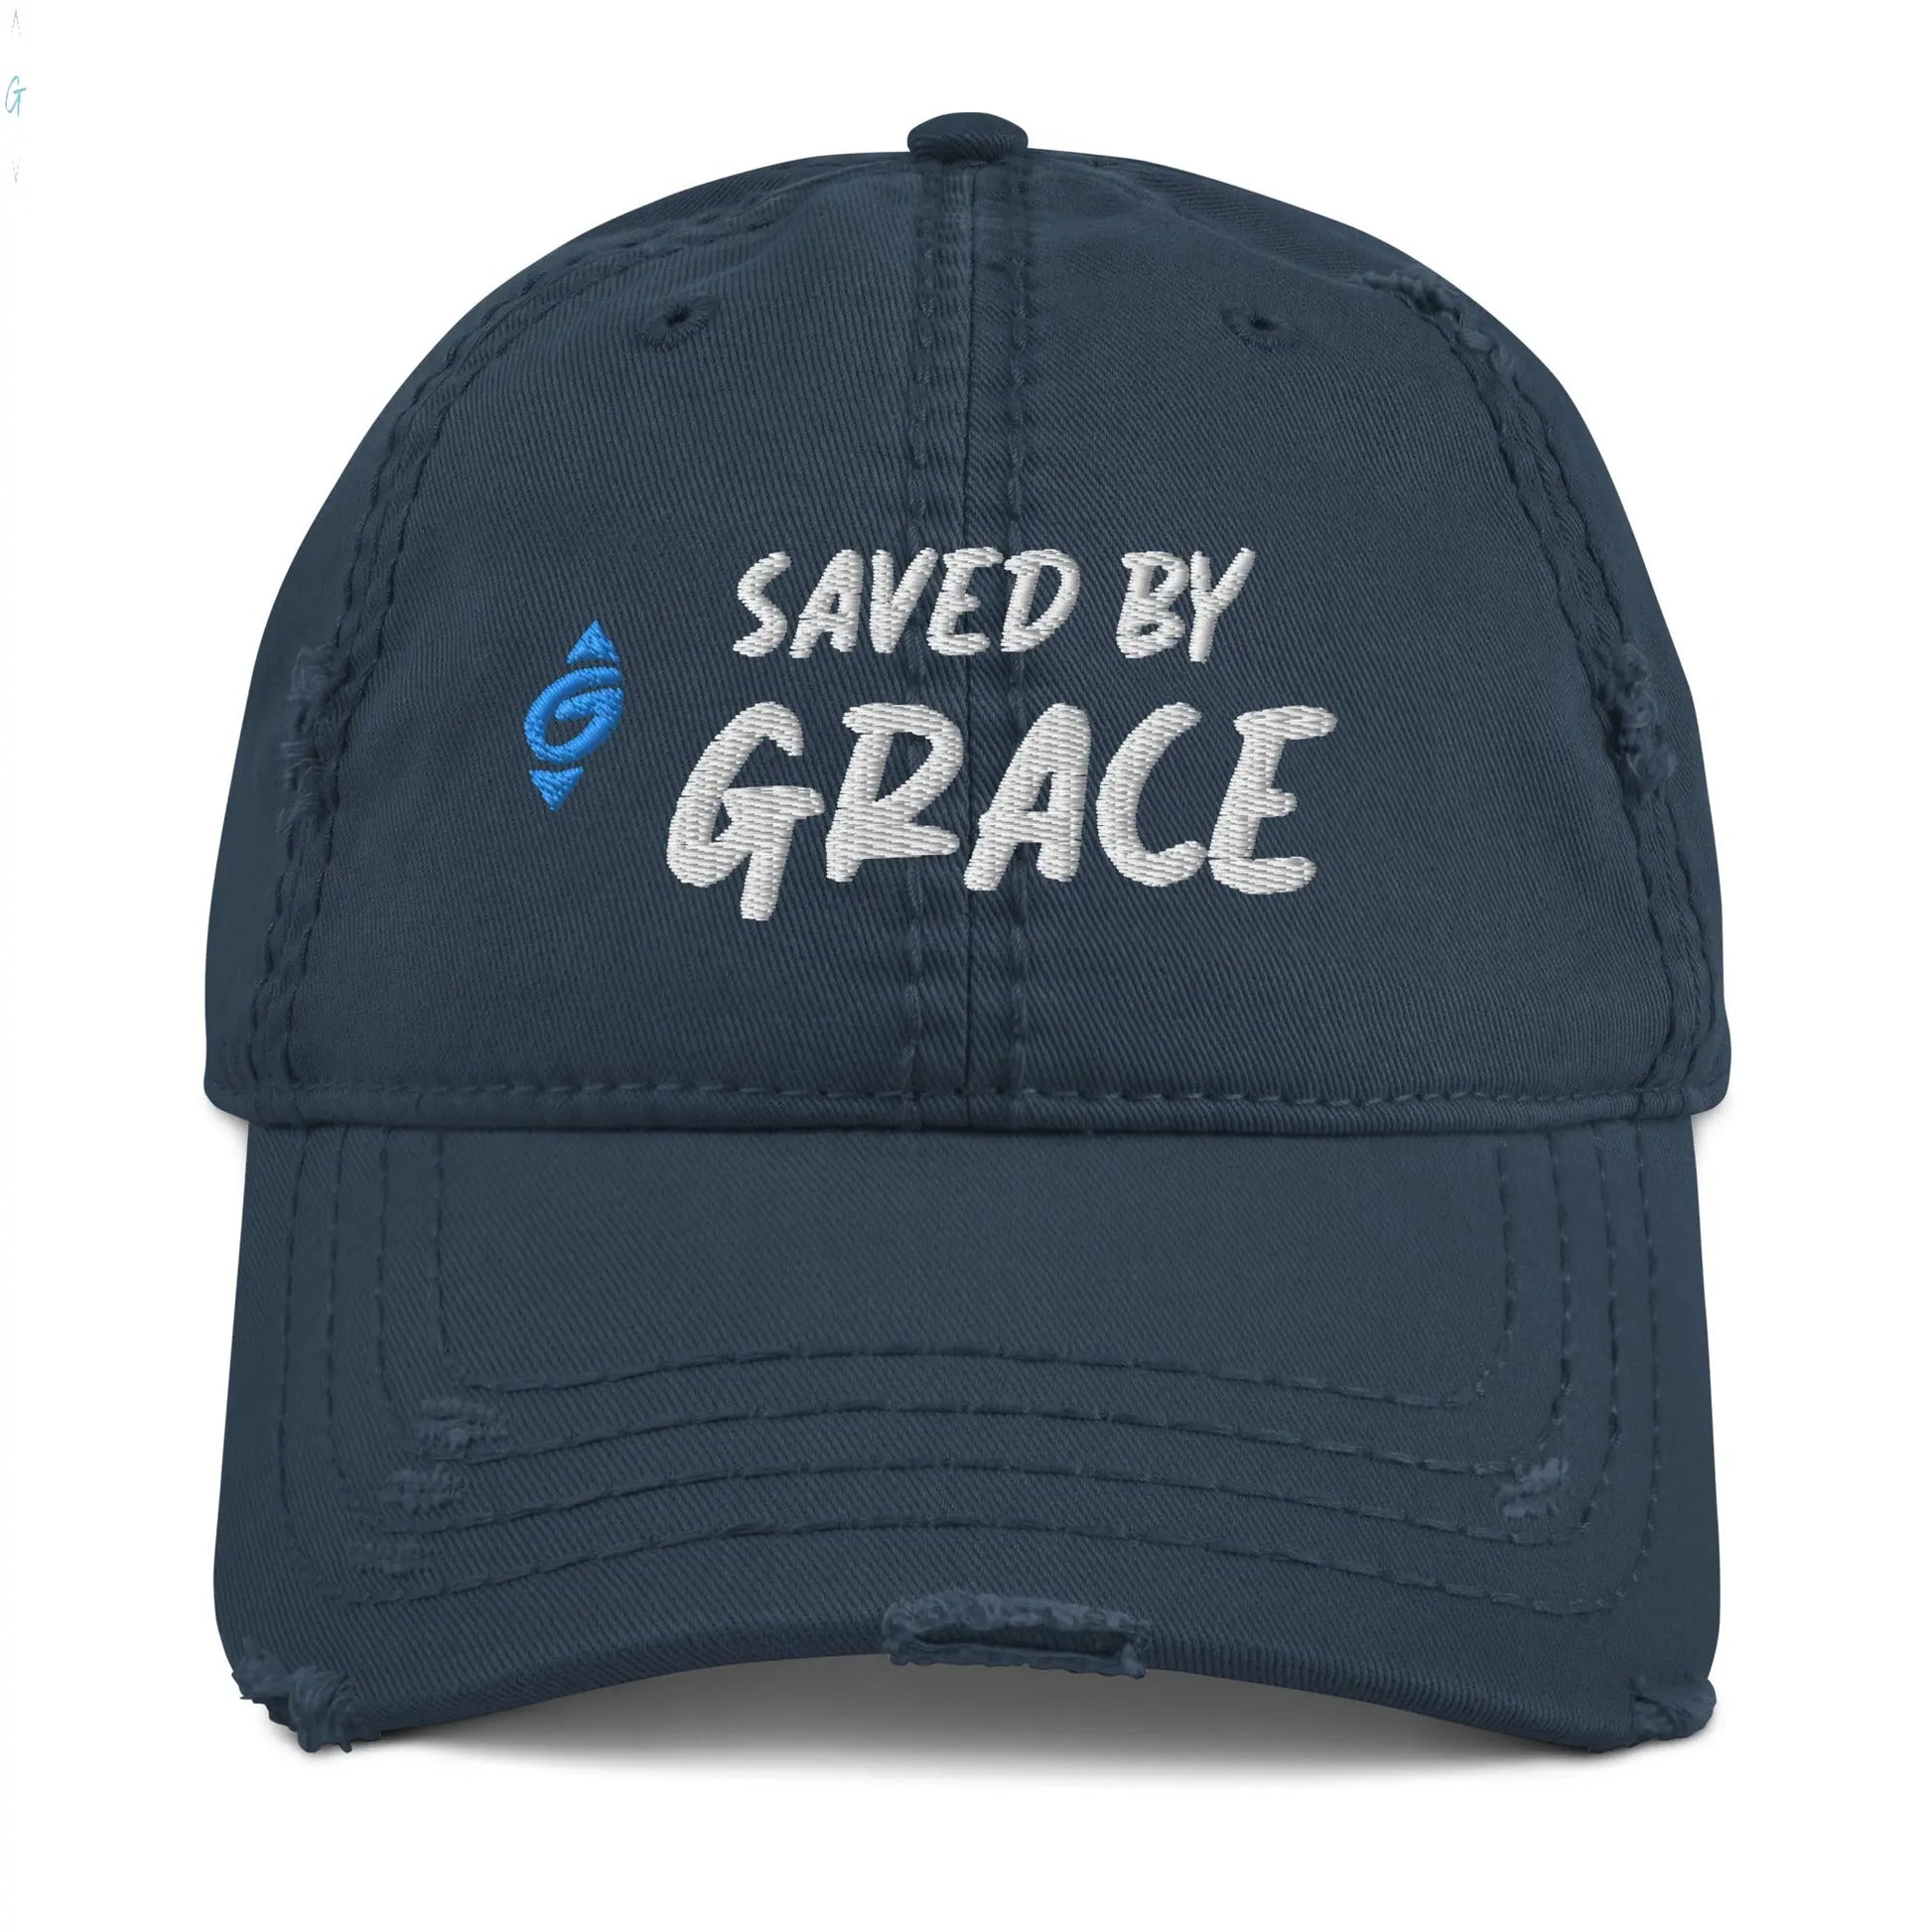 SAVED BY GRACE Distressed Ball Cap God's Corner Store